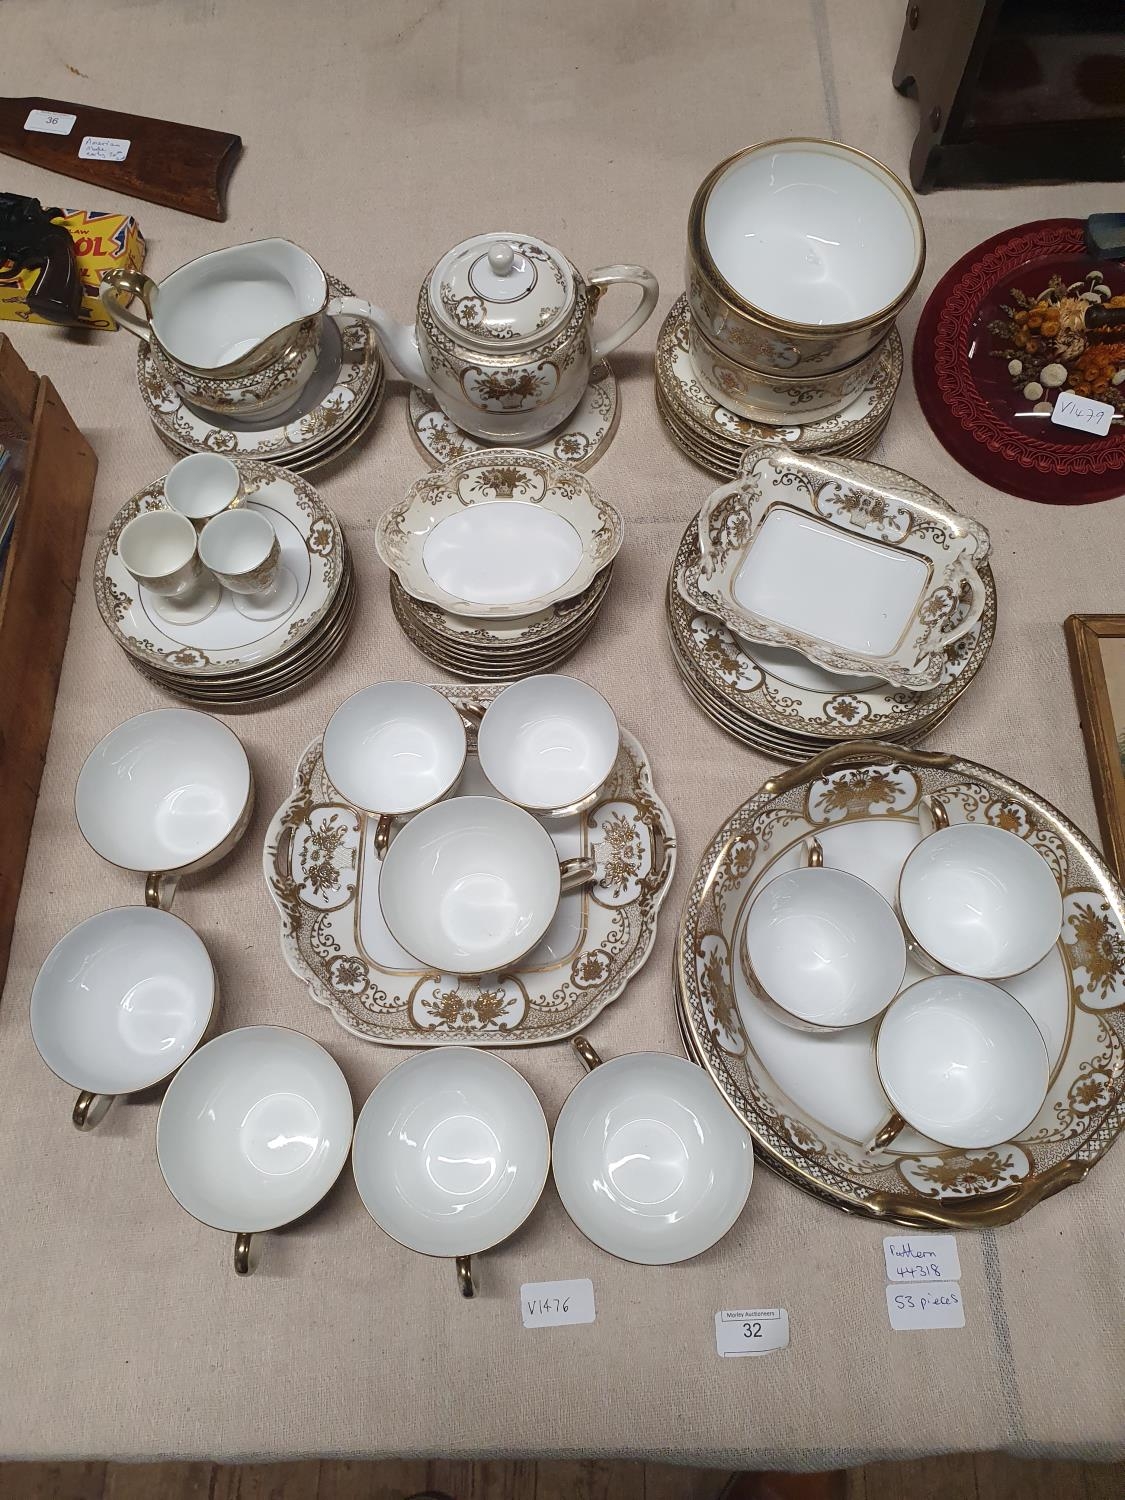 Noritake tea service . Pattern 44318 approx 53 pieces. shipping unavailable